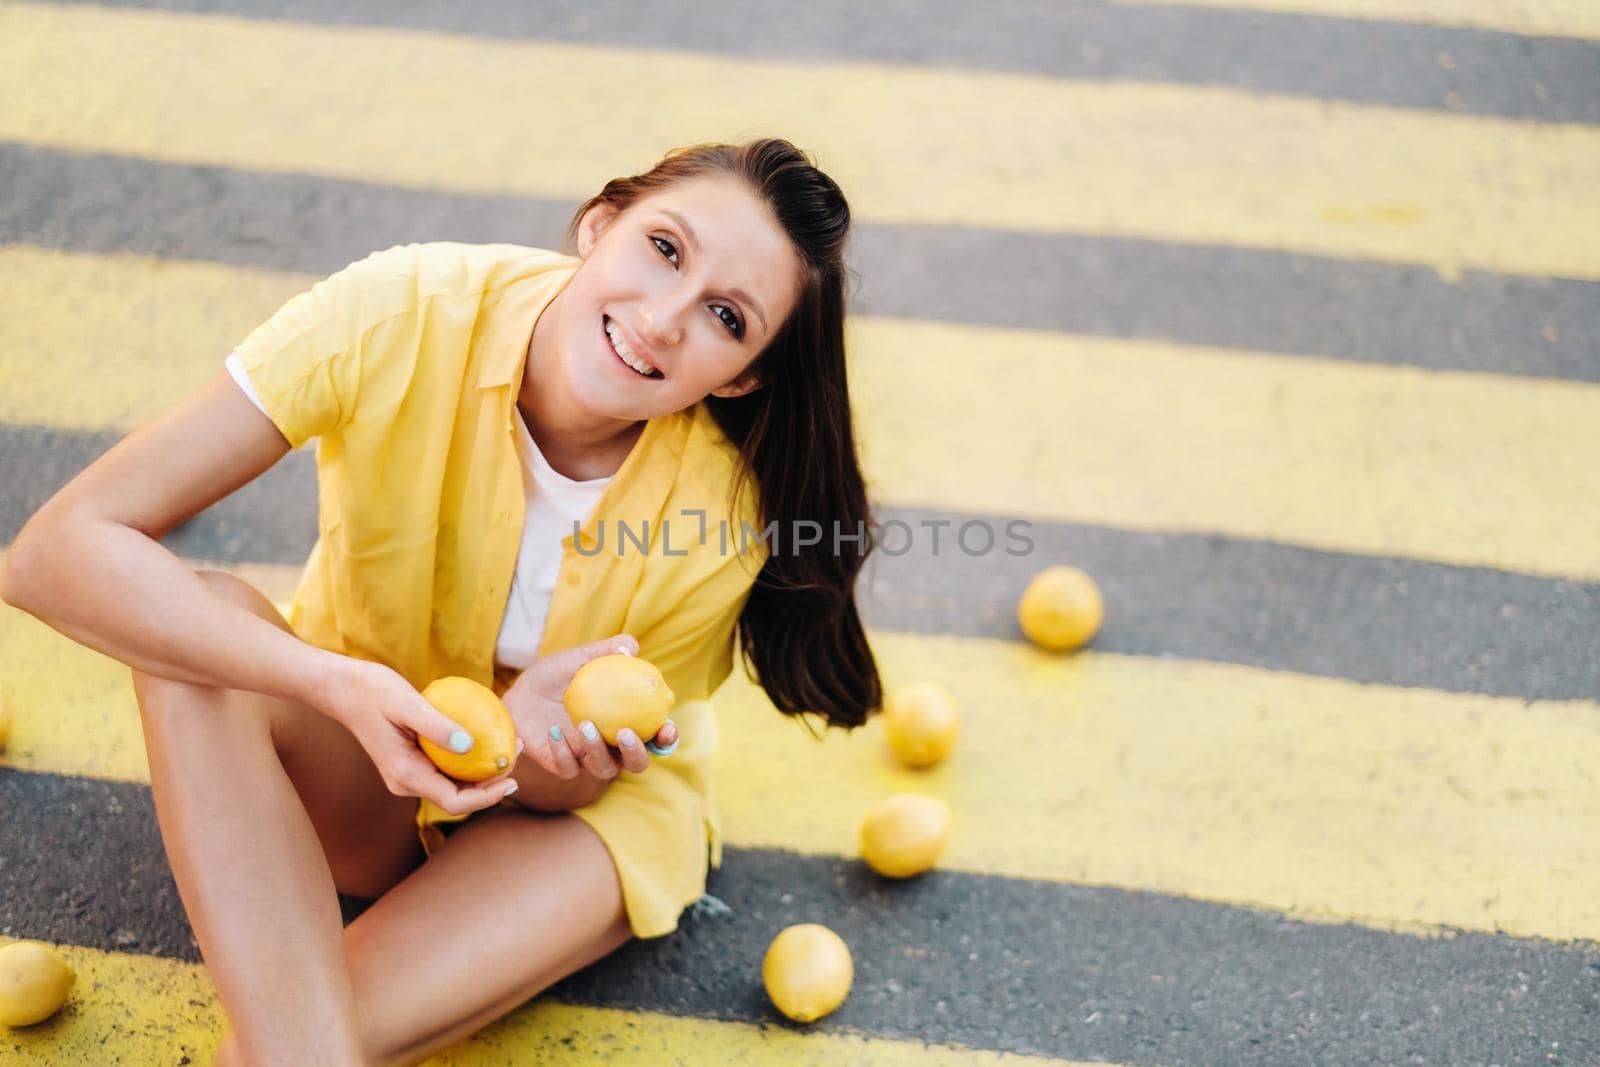 a girl holding lemons in her hands dressed in a yellow shirt, shorts and sitting on a yellow pedestrian crossing in the city and smiling. The lemon mood.